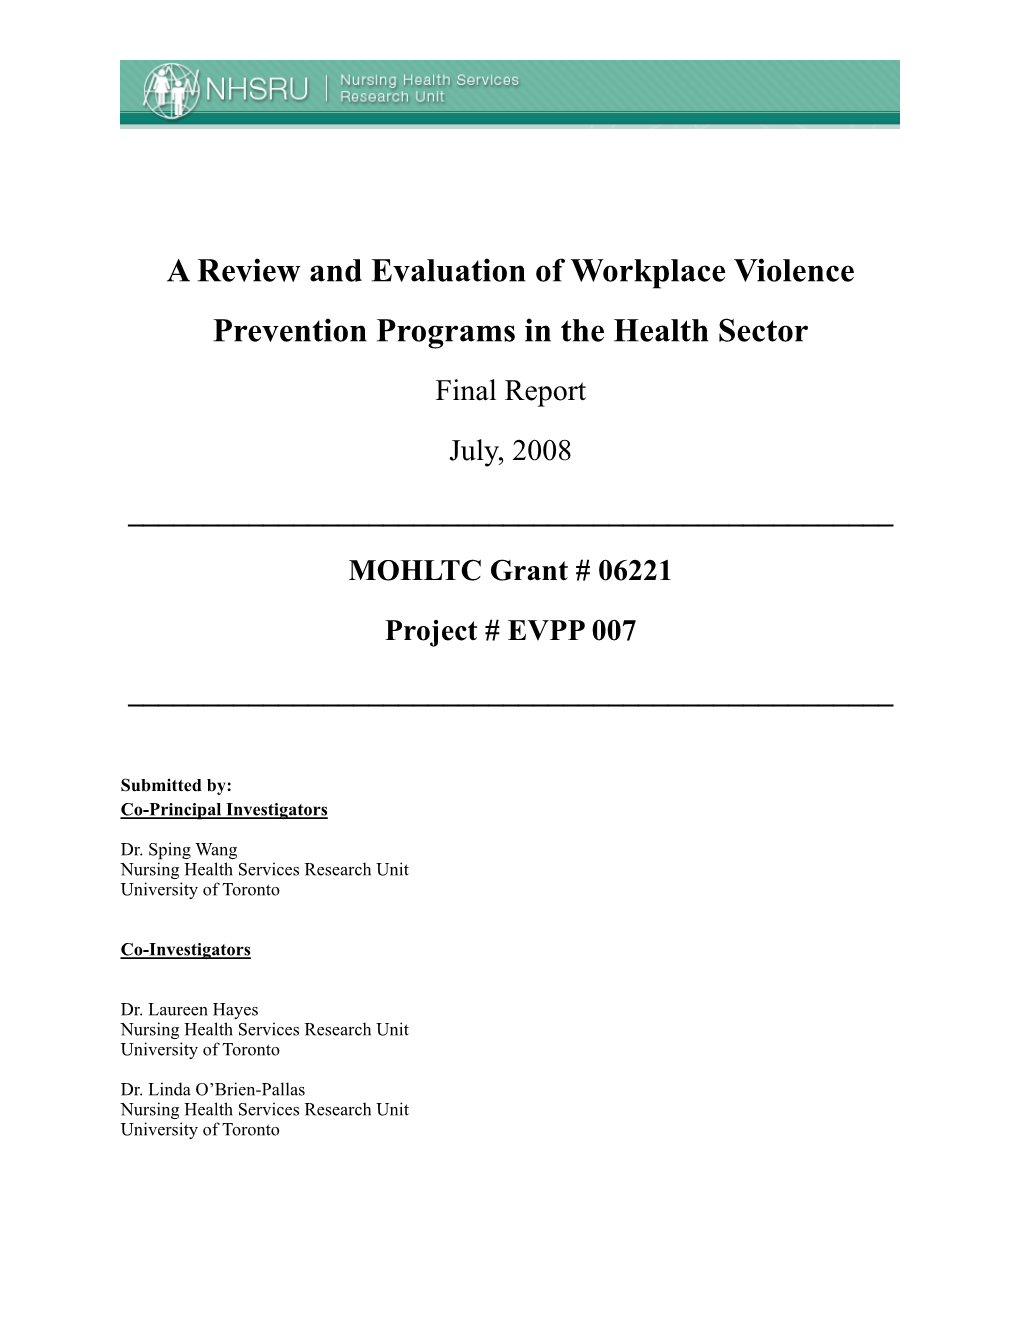 A Review and Evaluation of Workplace Violence Prevention Programs in the Health Sector Final Report July, 2008 ______MOHLTC Grant # 06221 Project # EVPP 007 ______